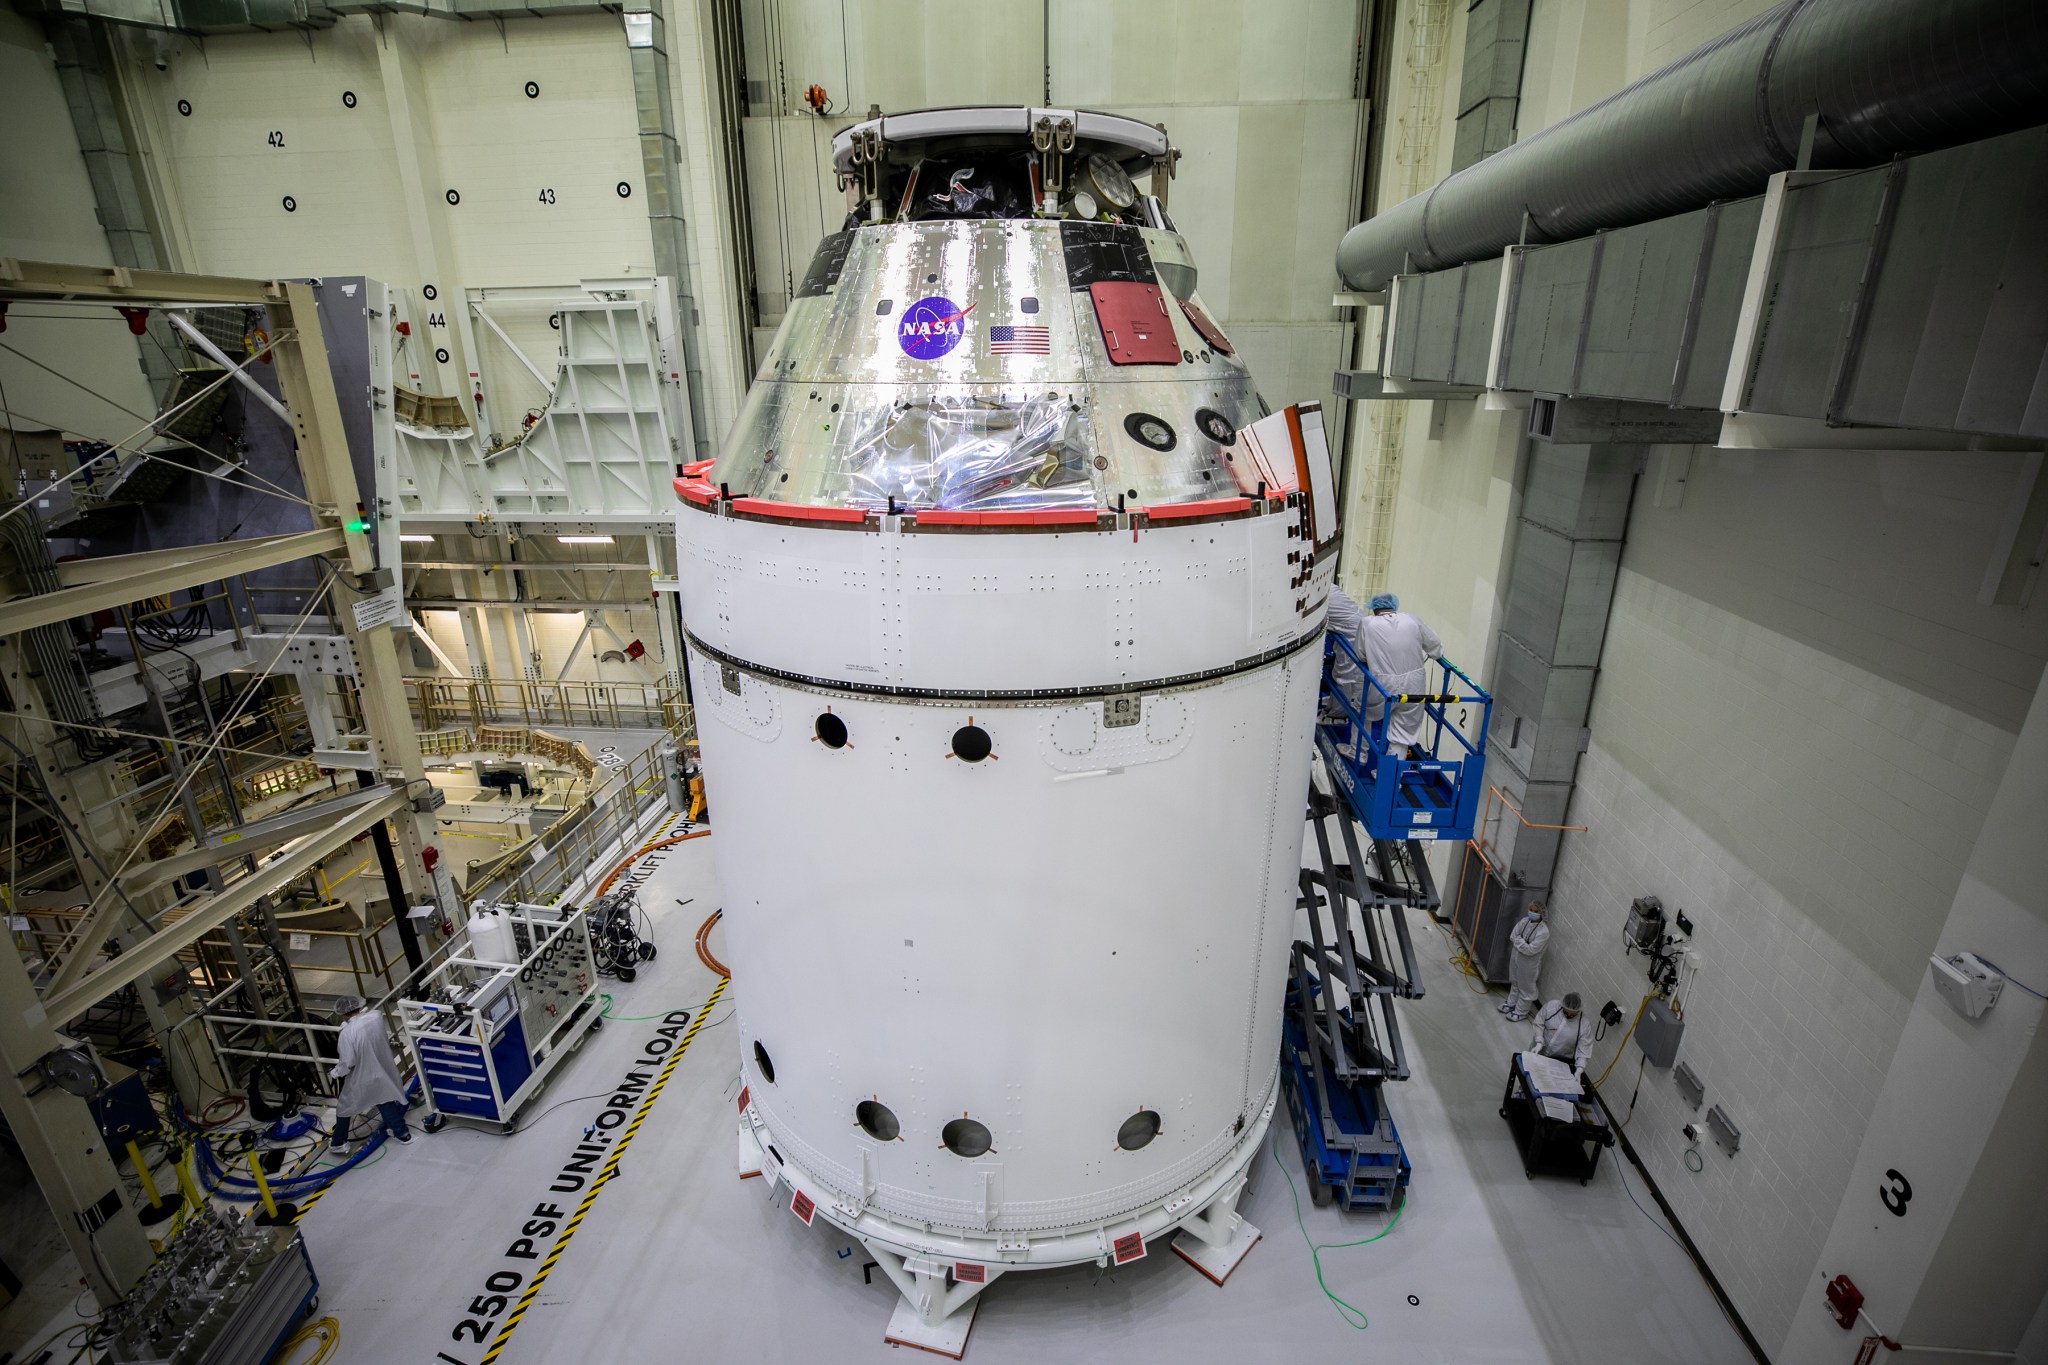 The Orion spacecraft for NASA’s Artemis I mission is in view inside the Operations and Checkout Building high bay on Oct. 28.